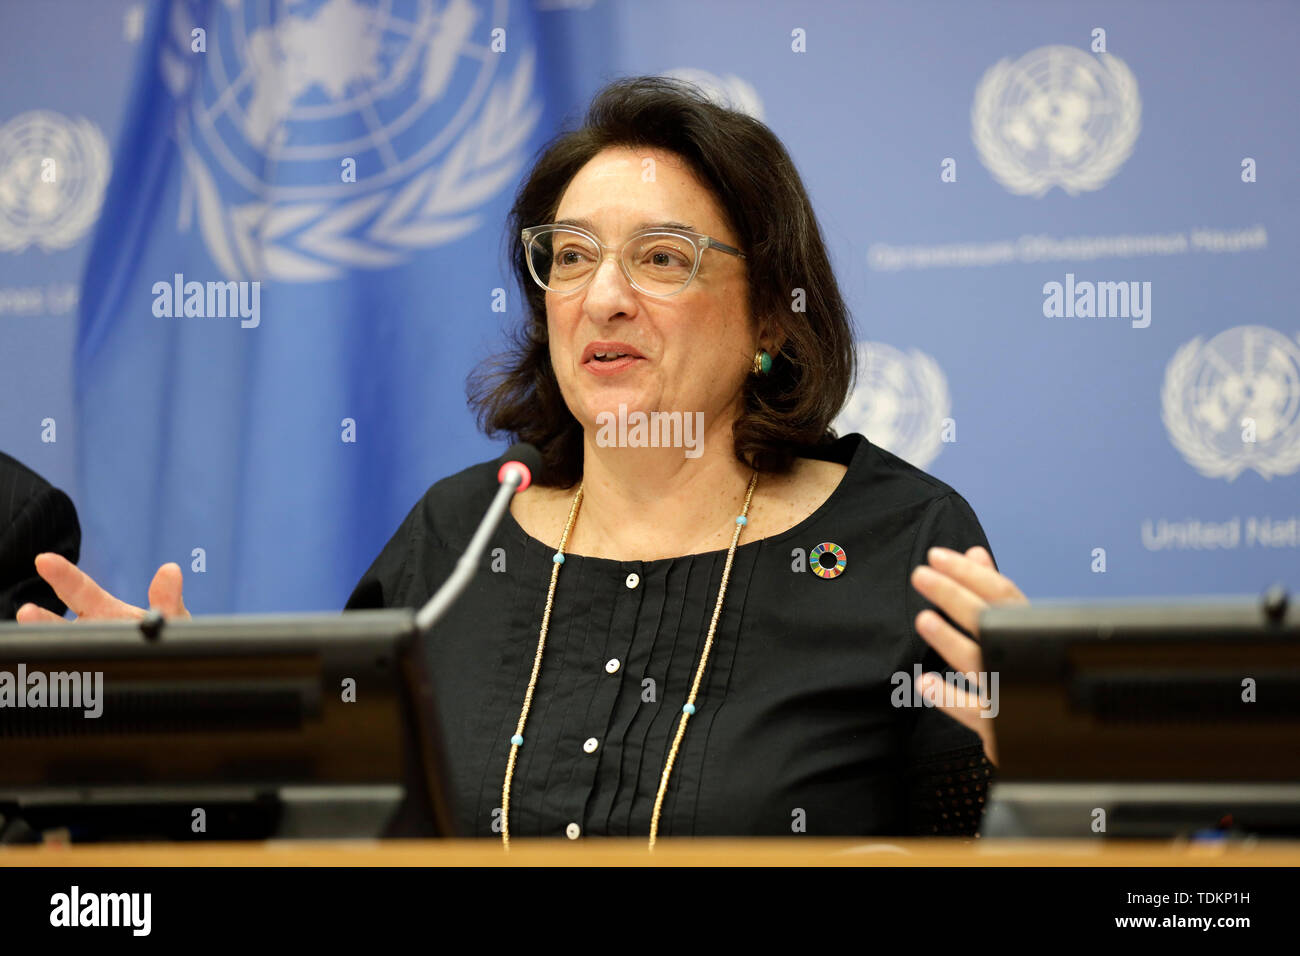 New York, NY, USA. 17th June, 2019. United Nations, UN headquarters in New  York. 17th June, 2019. Maria-Francesca Spatolisano, Assistant  Secretary-General for Policy Coordination and Inter-Agency Affairs in the  UN Department of